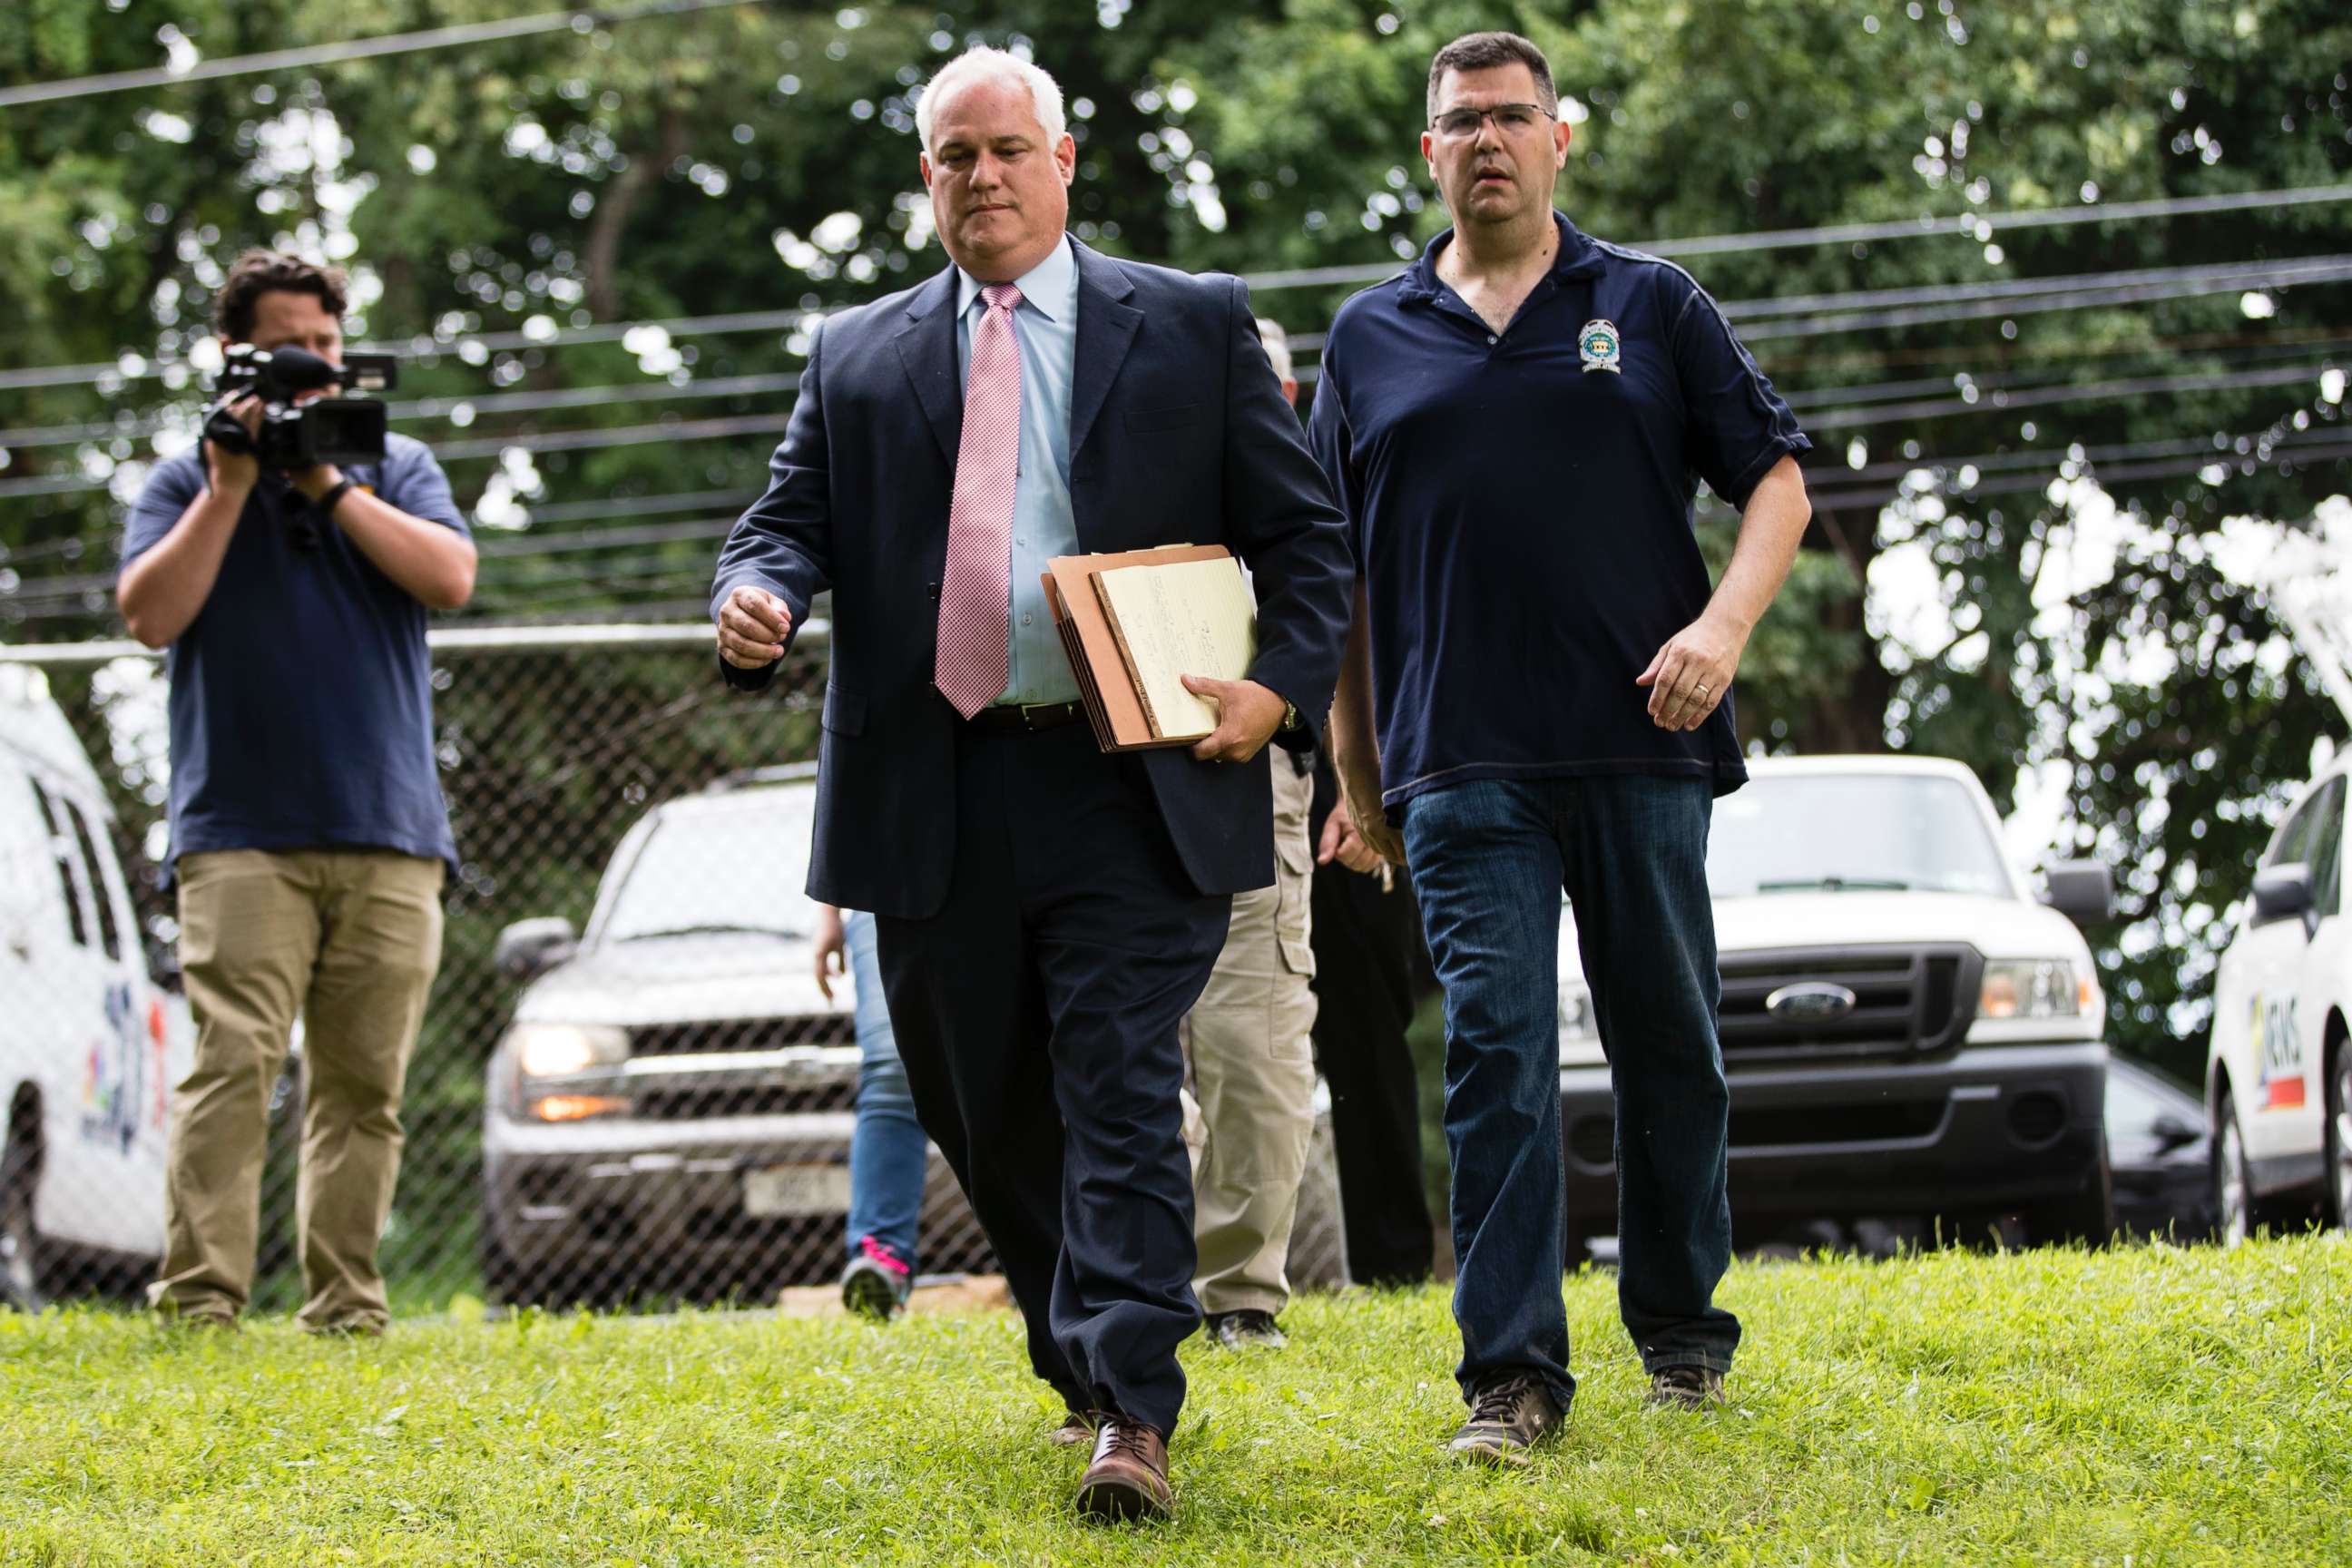 PHOTO: Matthew Weintraub, District Attorney for Bucks County, Pa., left, and Gregg Shore, First Assistant District Attorney arrive for a news conference, Wednesday, July 12, 2017, in Solebury, Pa.